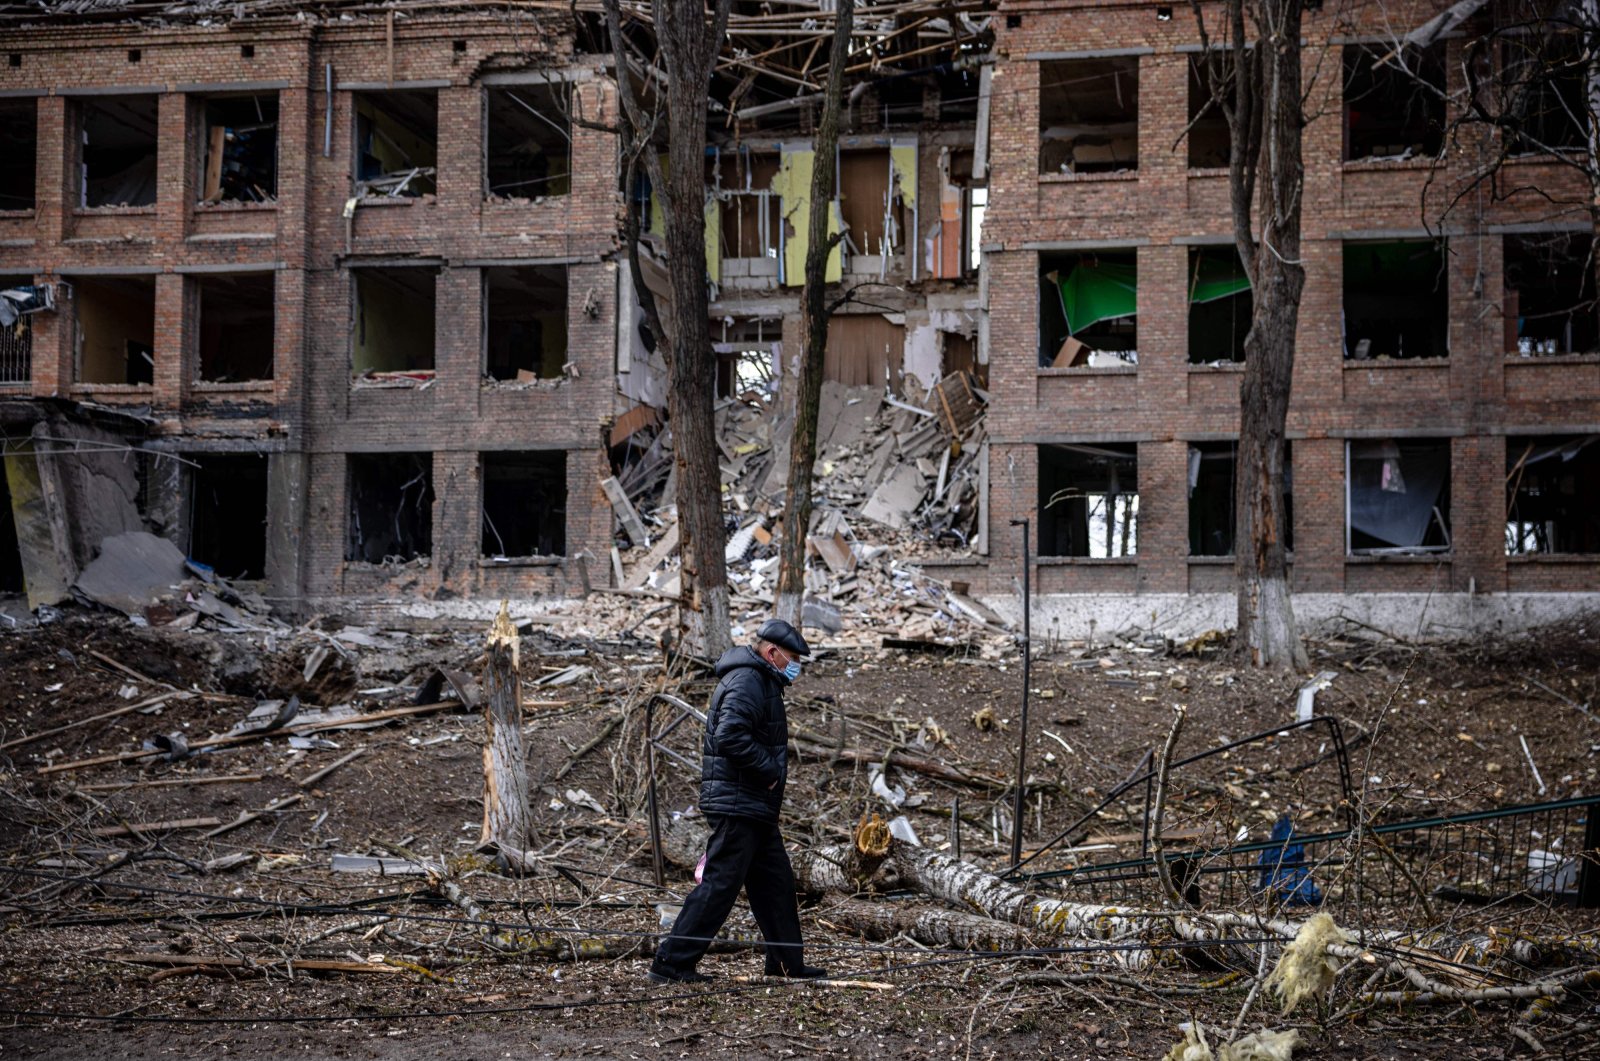 A man walks in front of a destroyed building after a Russian missile attack in the town of Vasylkiv, near Kyiv, Ukraine, Feb. 27, 2022. (AFP Photo)